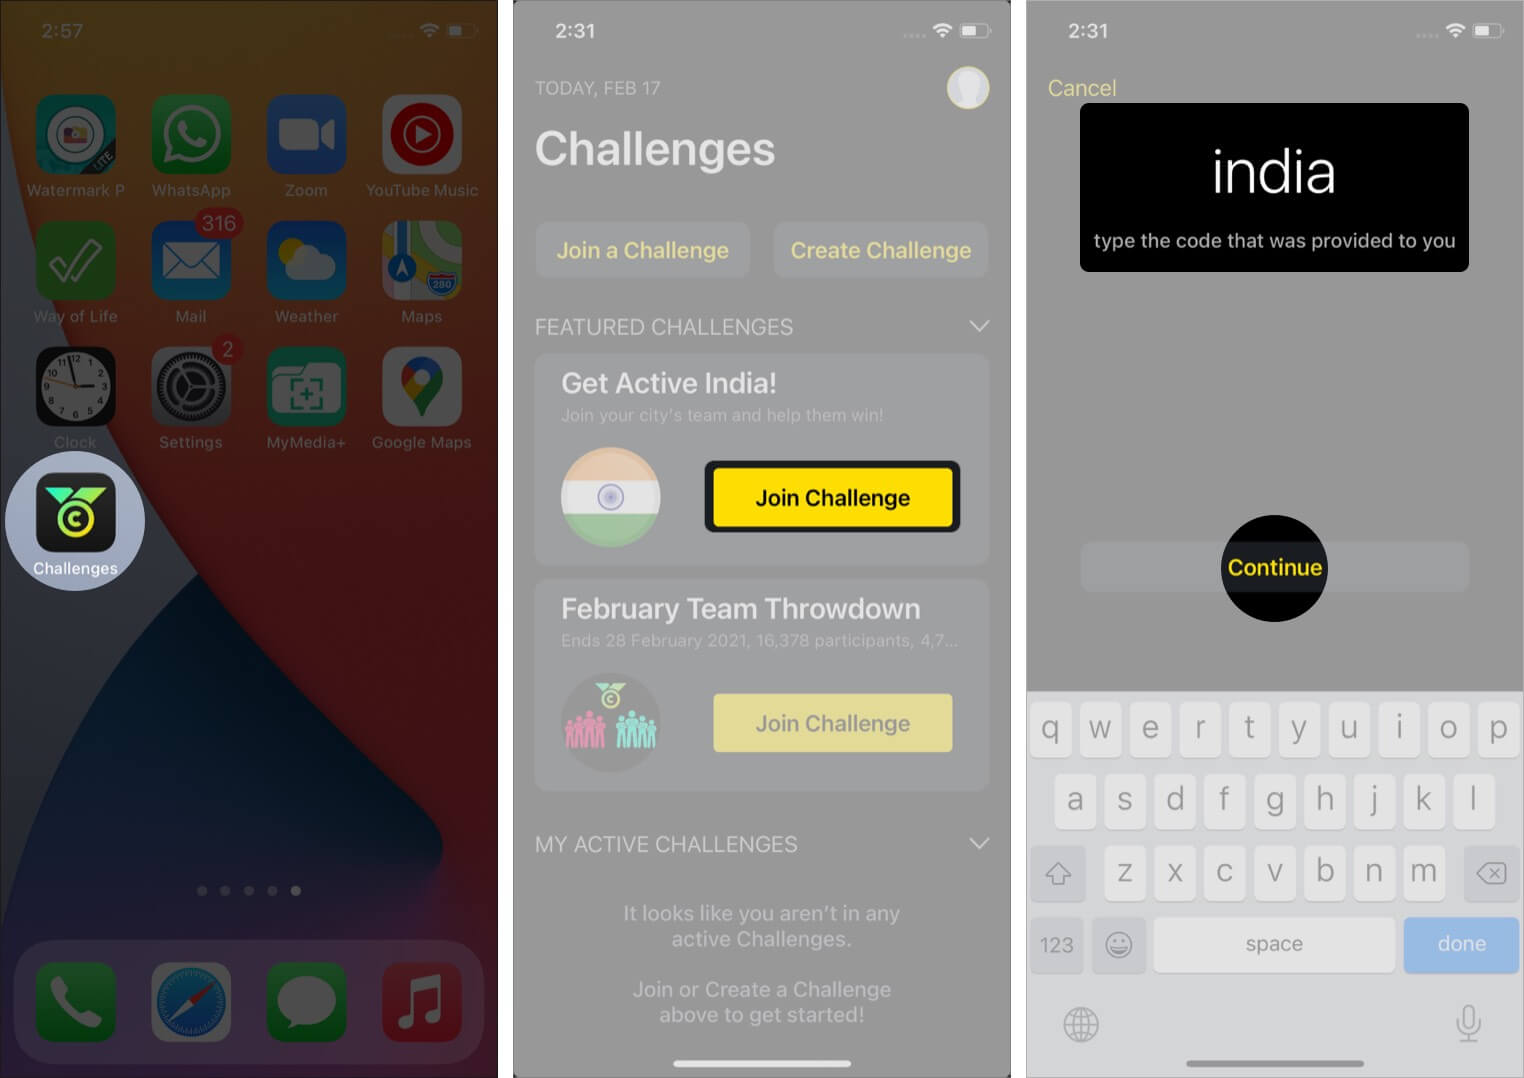 Open Challenges app, Tap Join Challenge, Enter code india and tap Continue